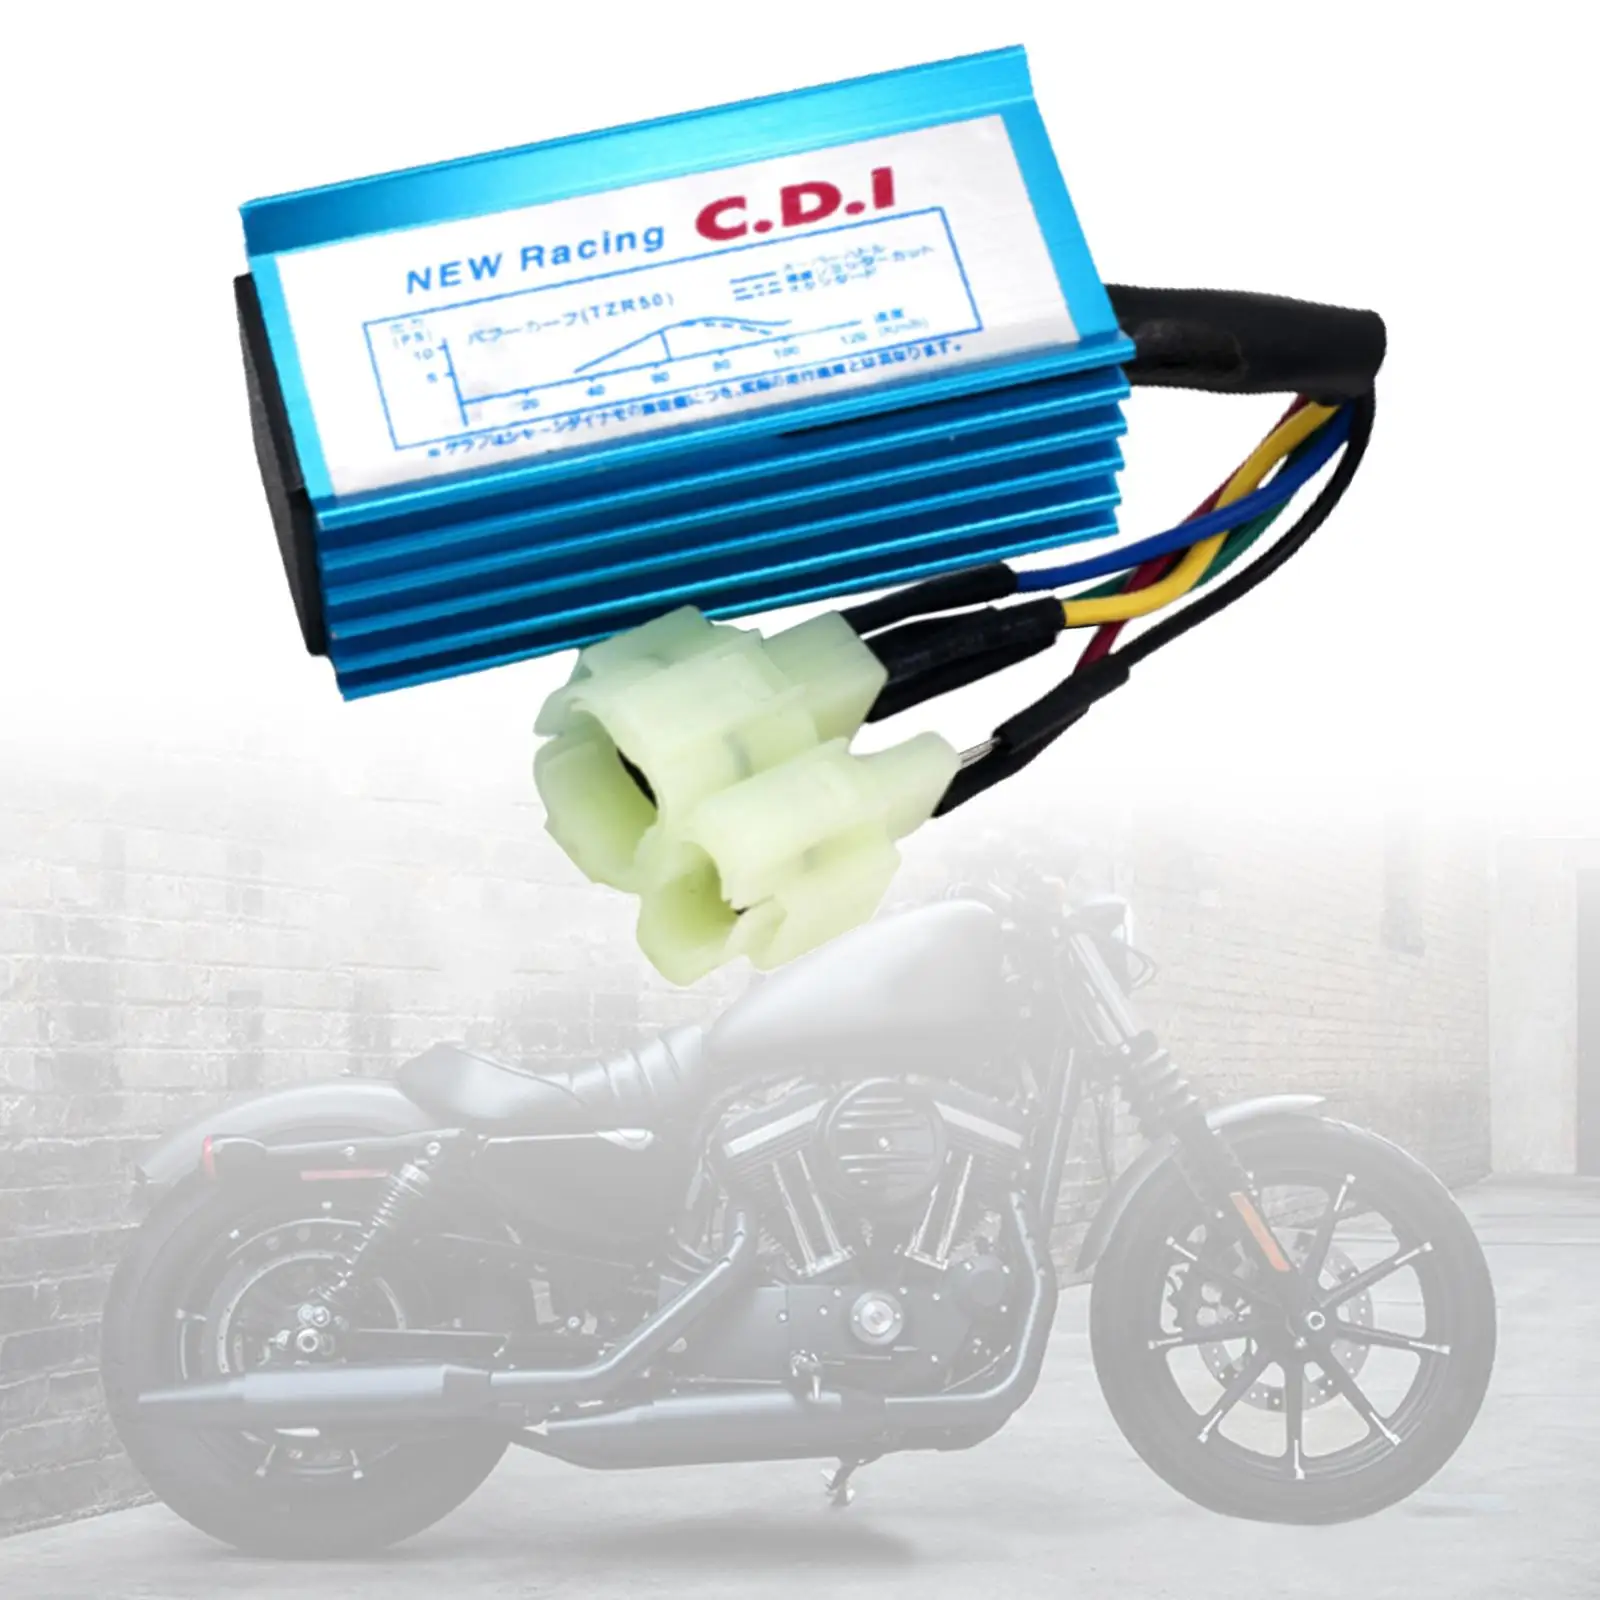 6 Pin Gy6 Racing Cdi Box Aluminum Alloy with Ignition Coil Fit for Gy6 50cc-250cc Series Engines Motorcycle Go-Karts Scooters